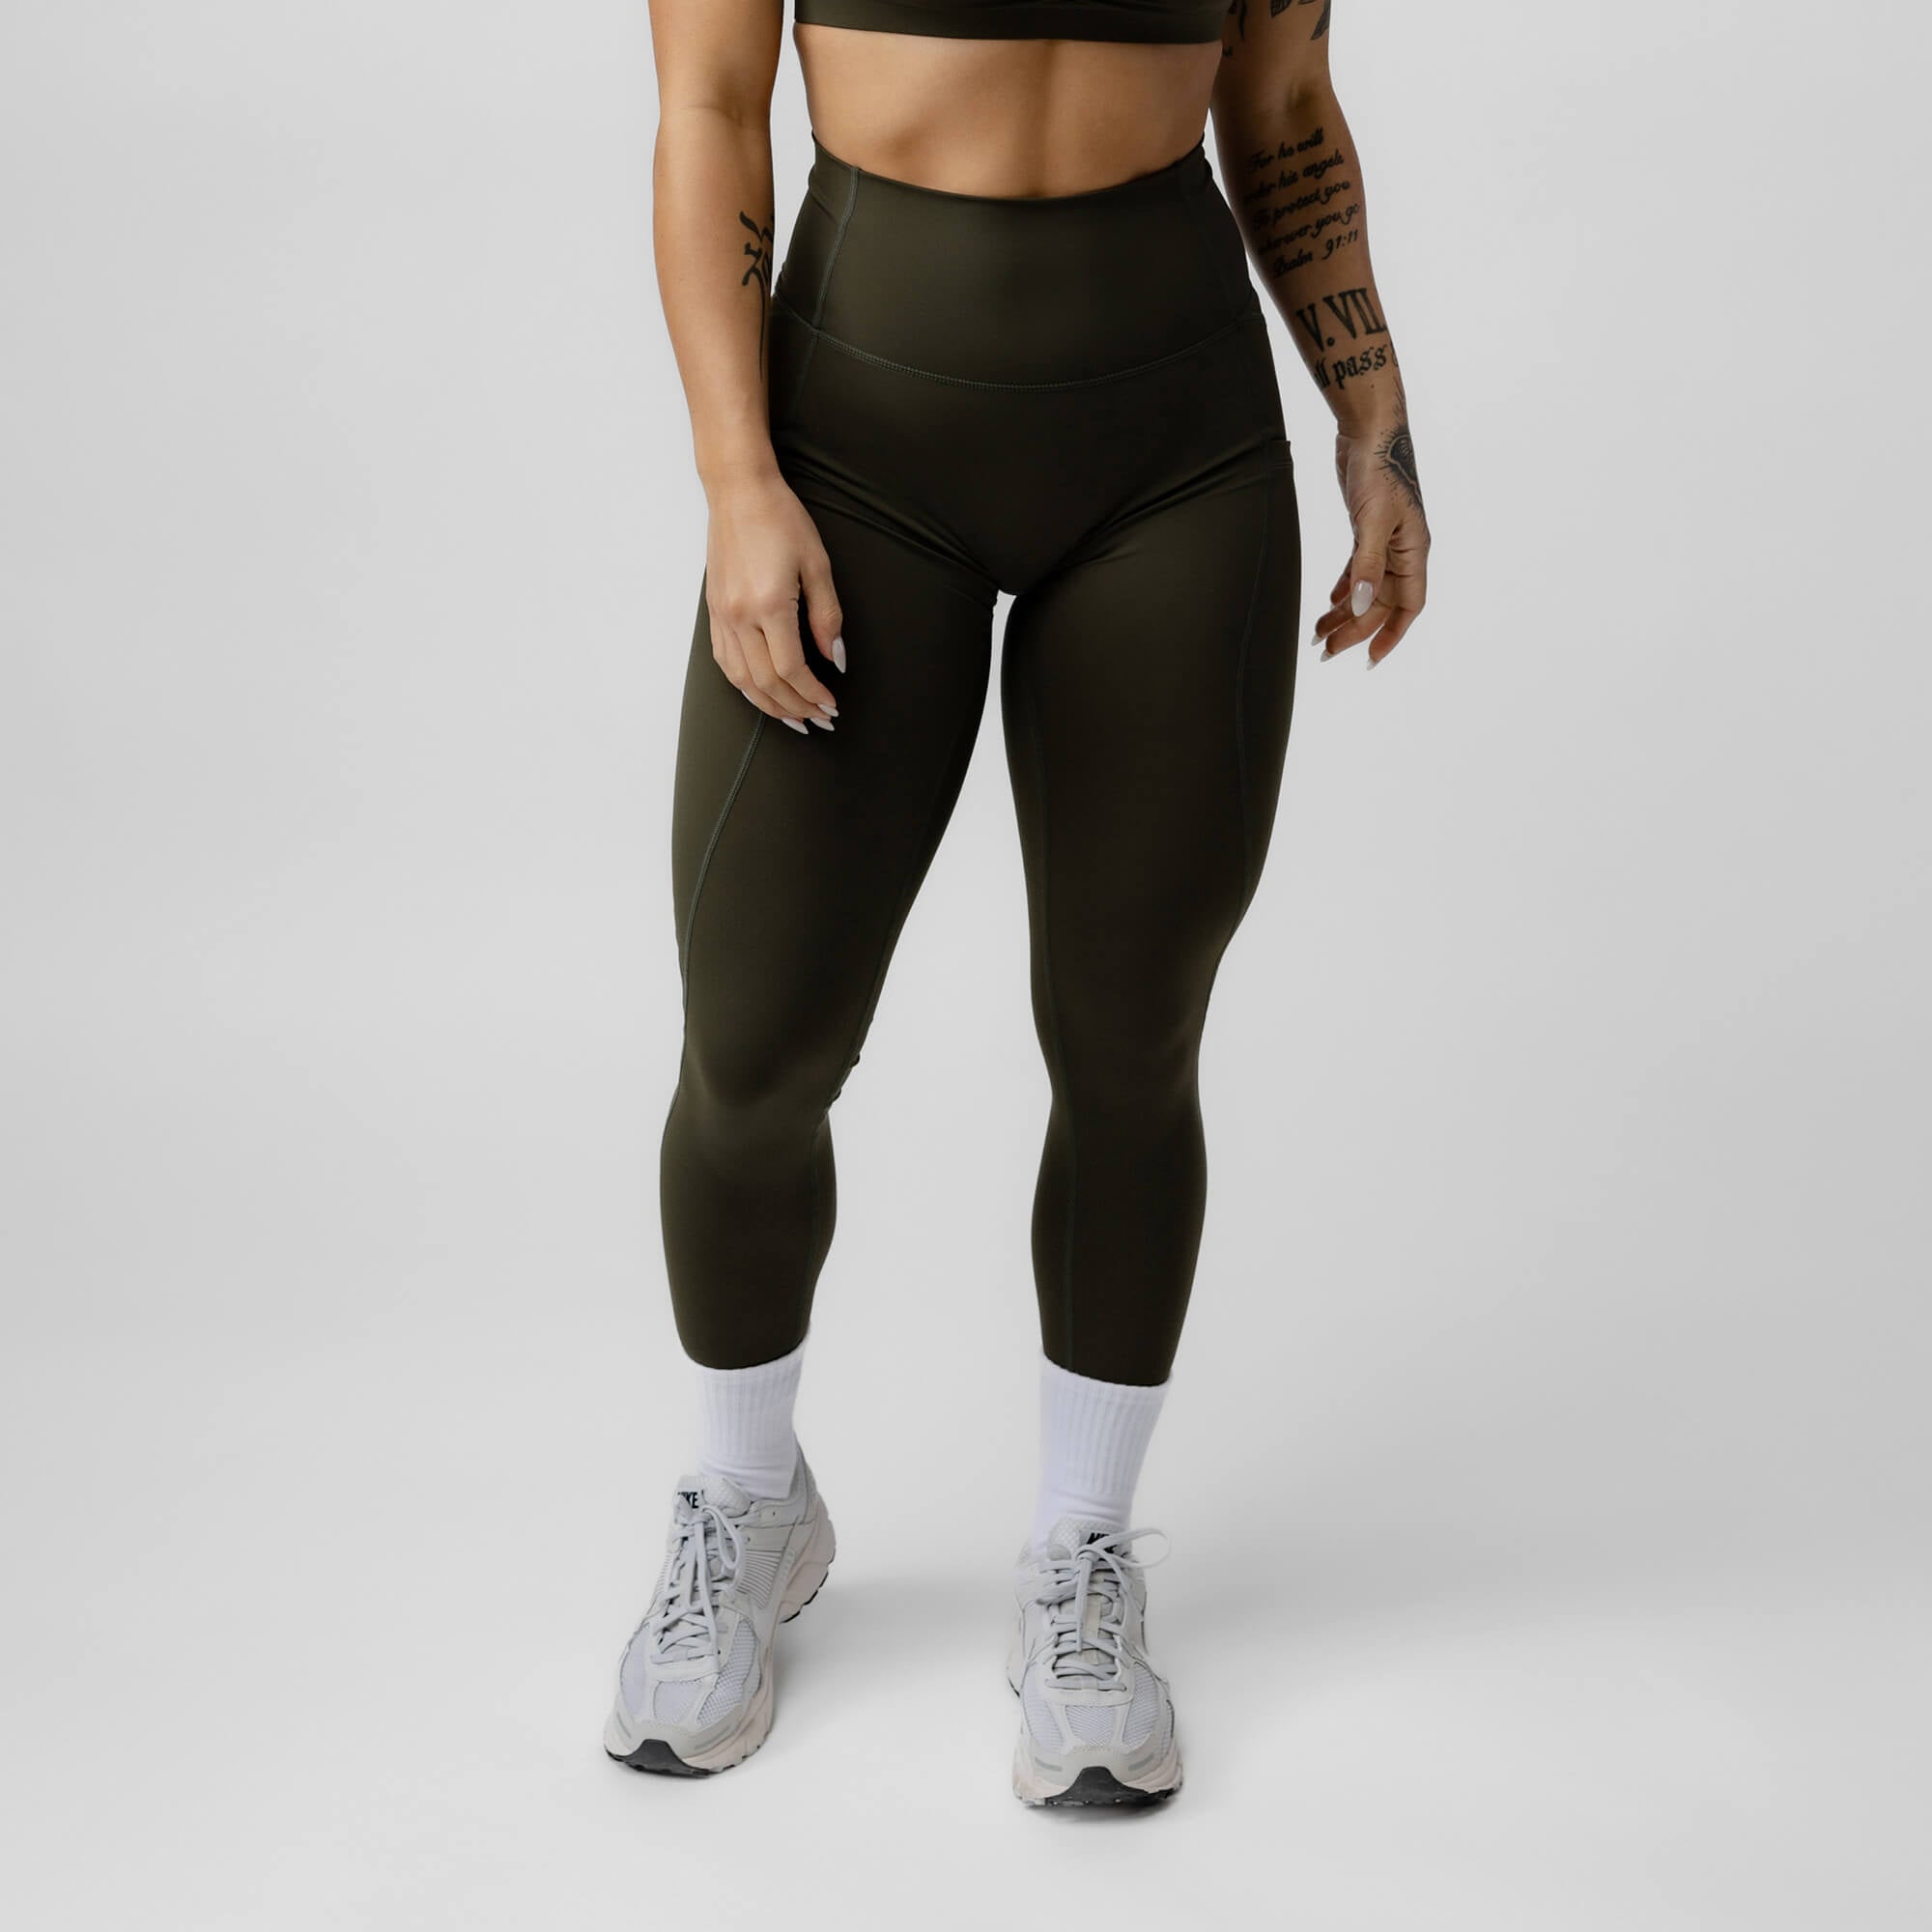 Buyer's Guide to Sizing and Ordering Gymshark Leggings 